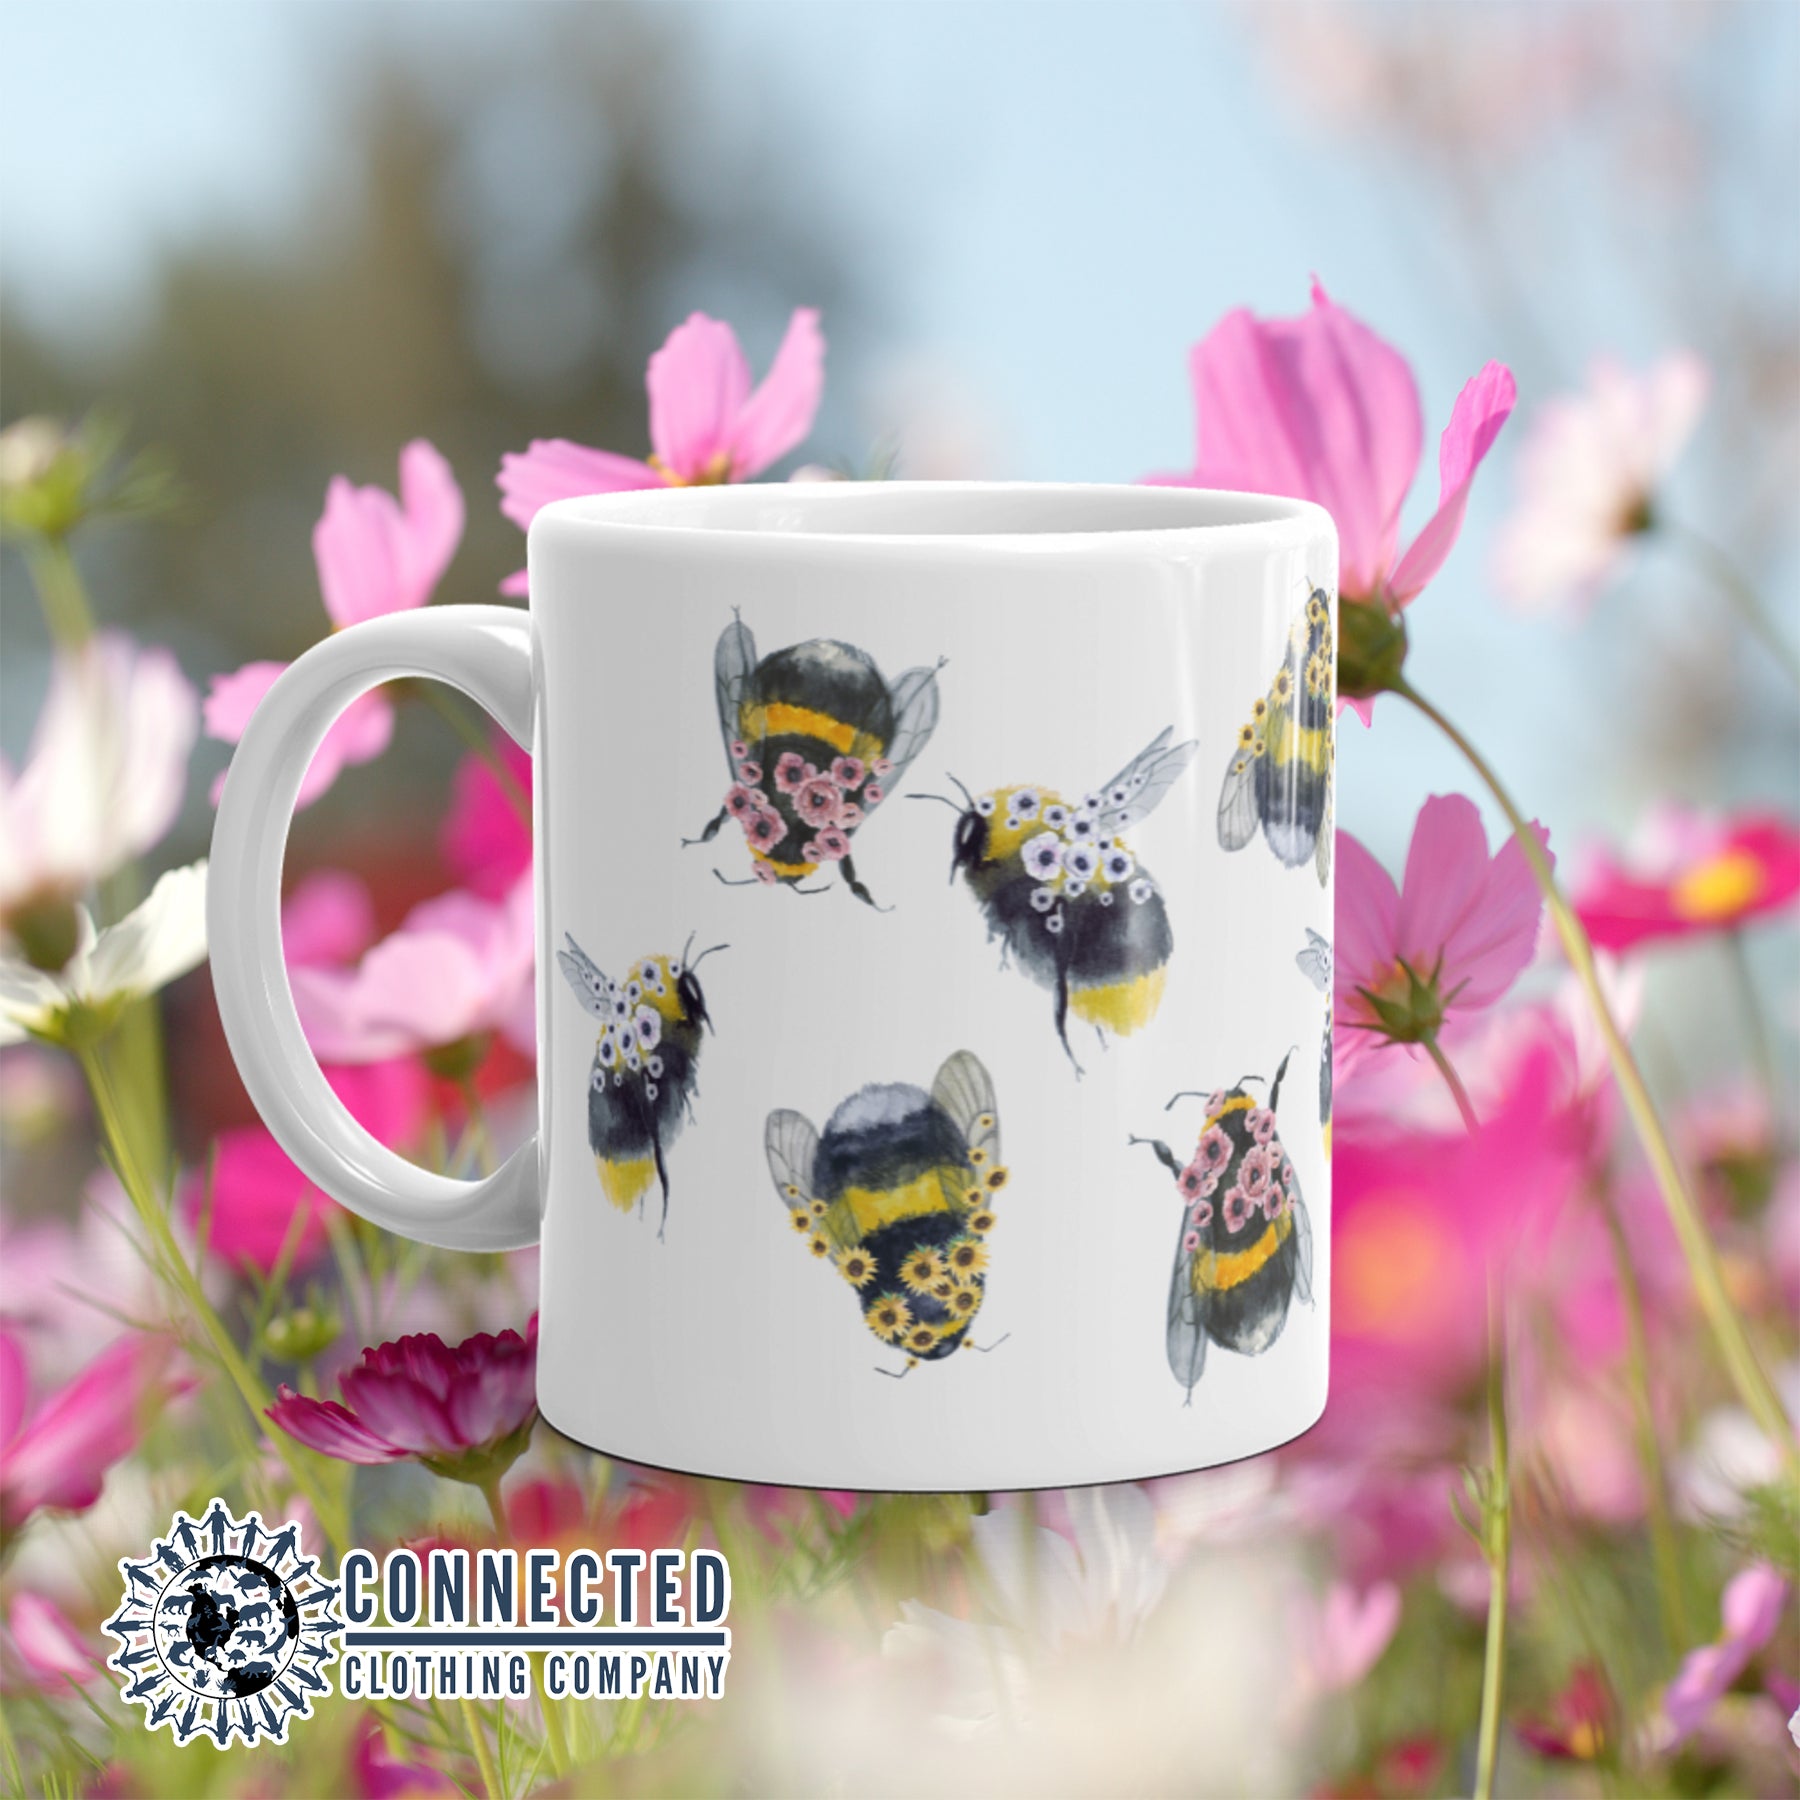 Flower Bee Classic Mug - Connected Clothing Company - Ethically and Sustainably Made - 10% of profits donated to bee conservation